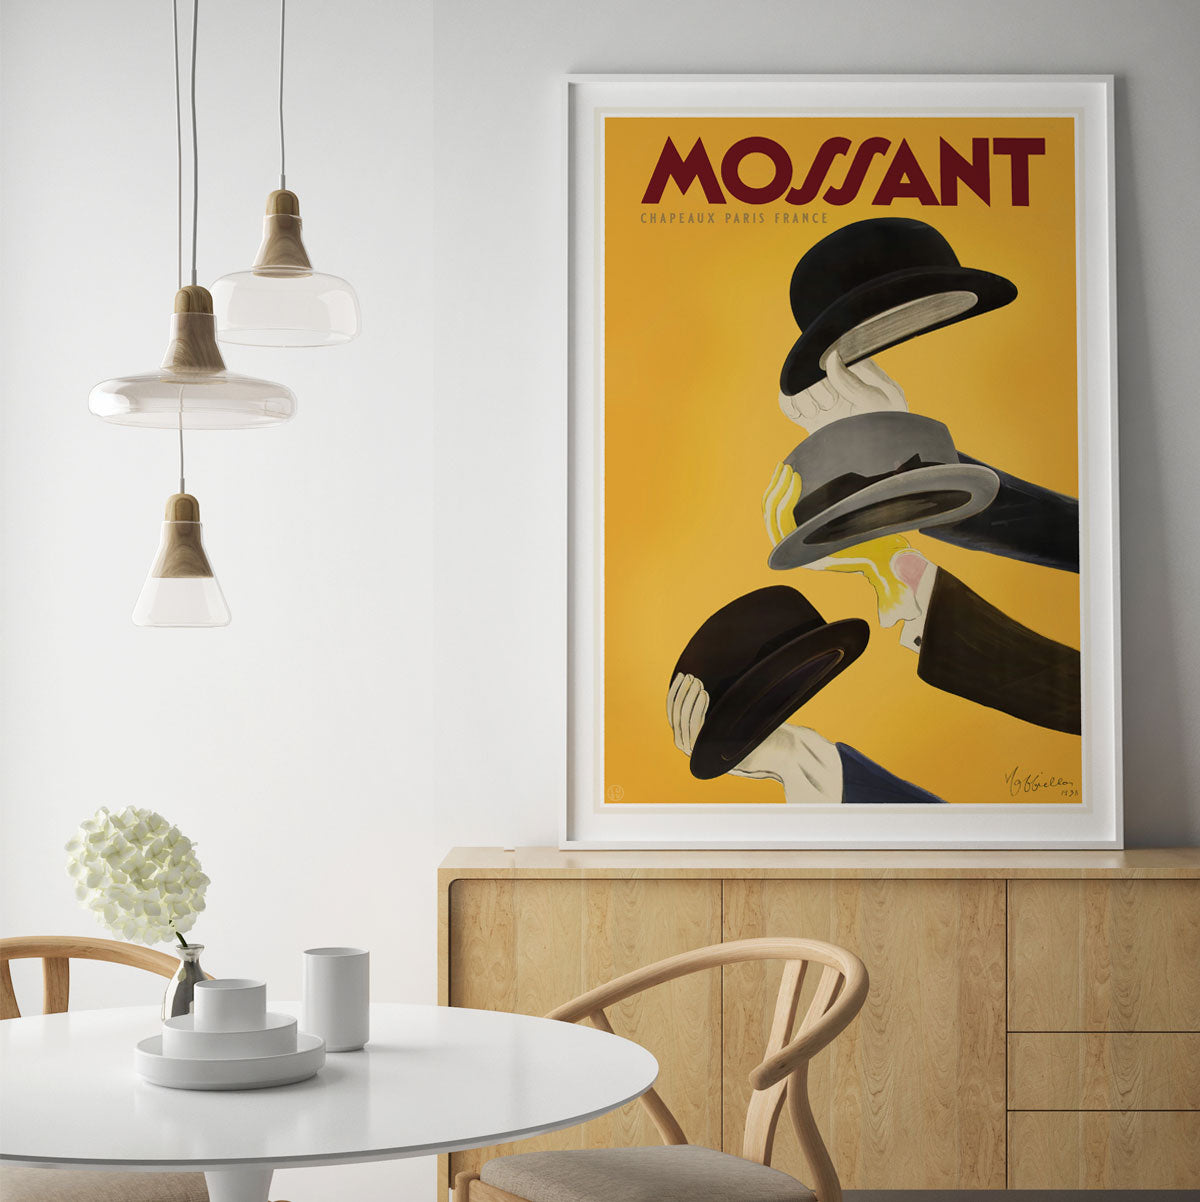 Mossant hats France vintage retro advertising poster from Places We Luv